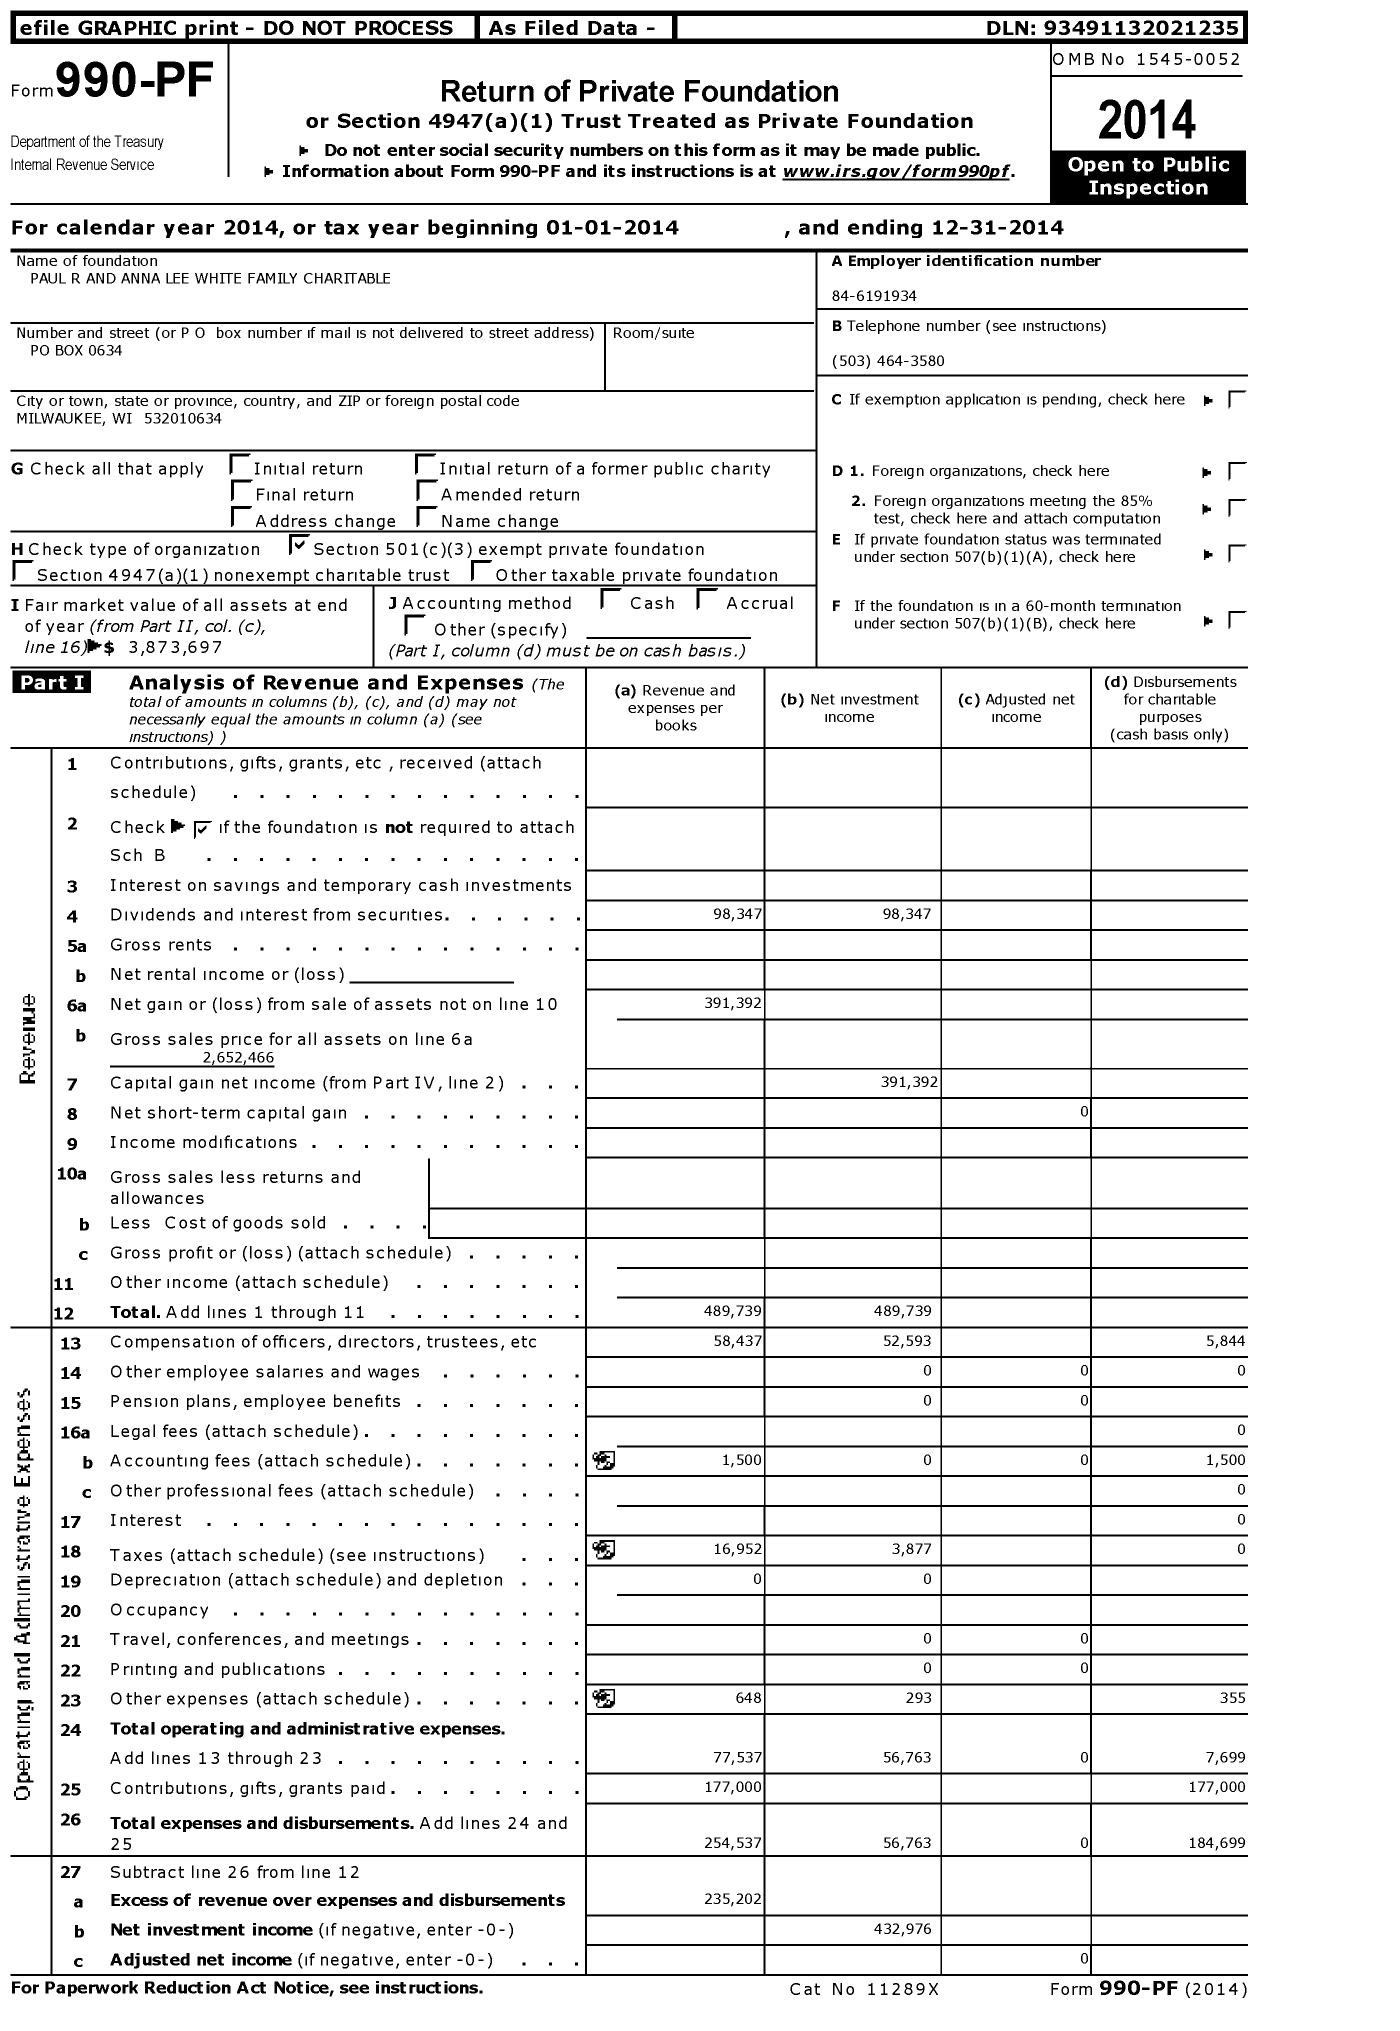 Image of first page of 2014 Form 990PF for Paul R and Anna Lee White Family Charitable